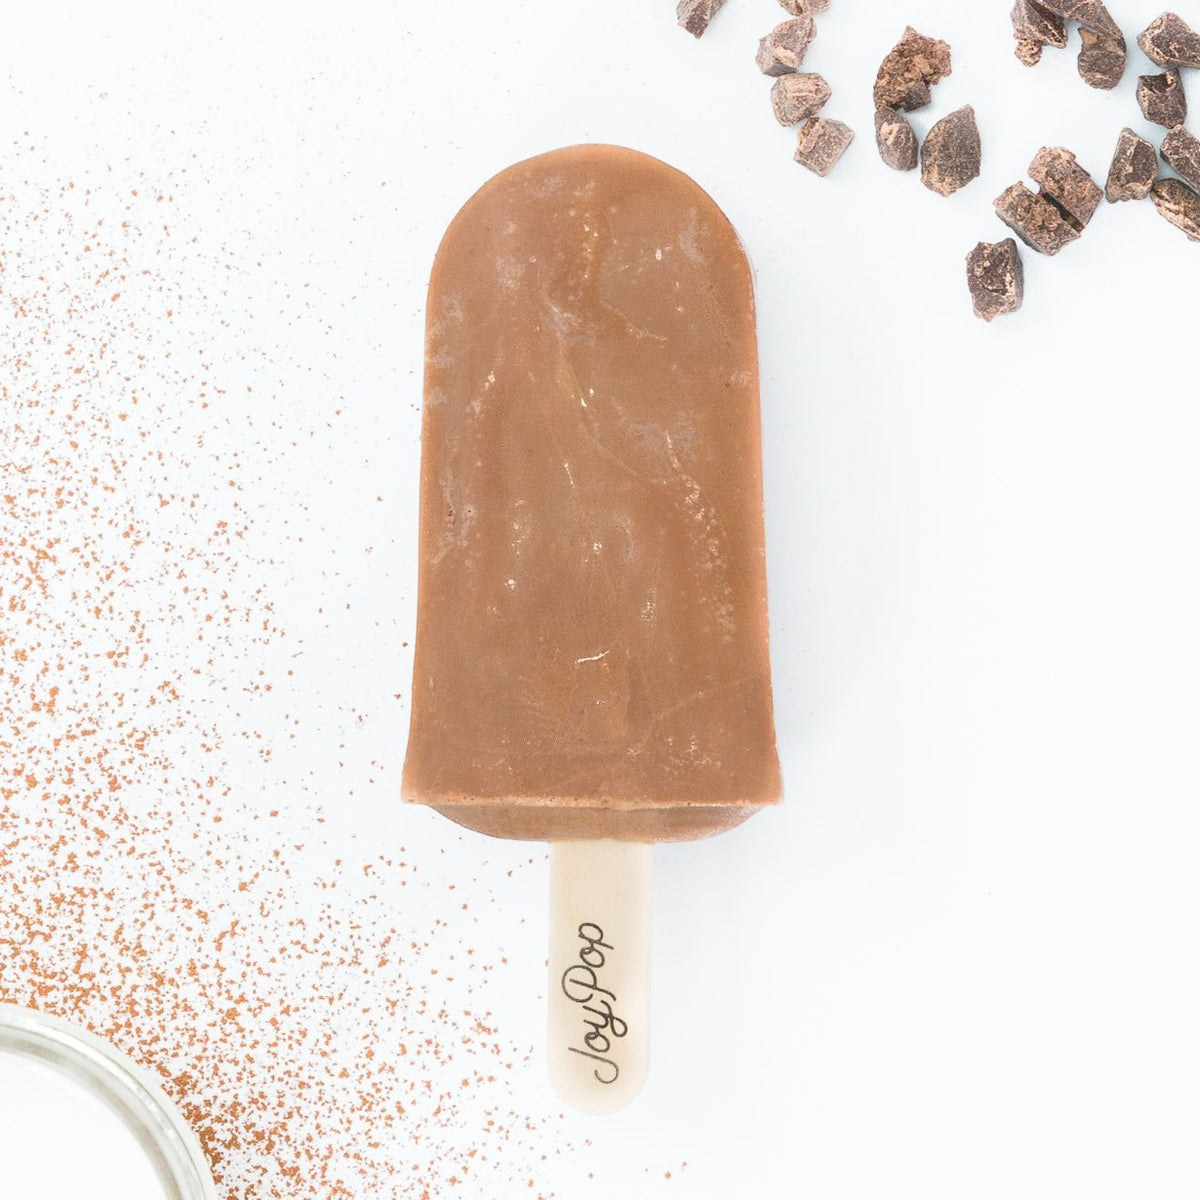 Chocolate Fudge Joy pop ice pop in the middle with chocolate pieces at the top right and a cup of cream inside a dusting of cocoa powder in the bottom left